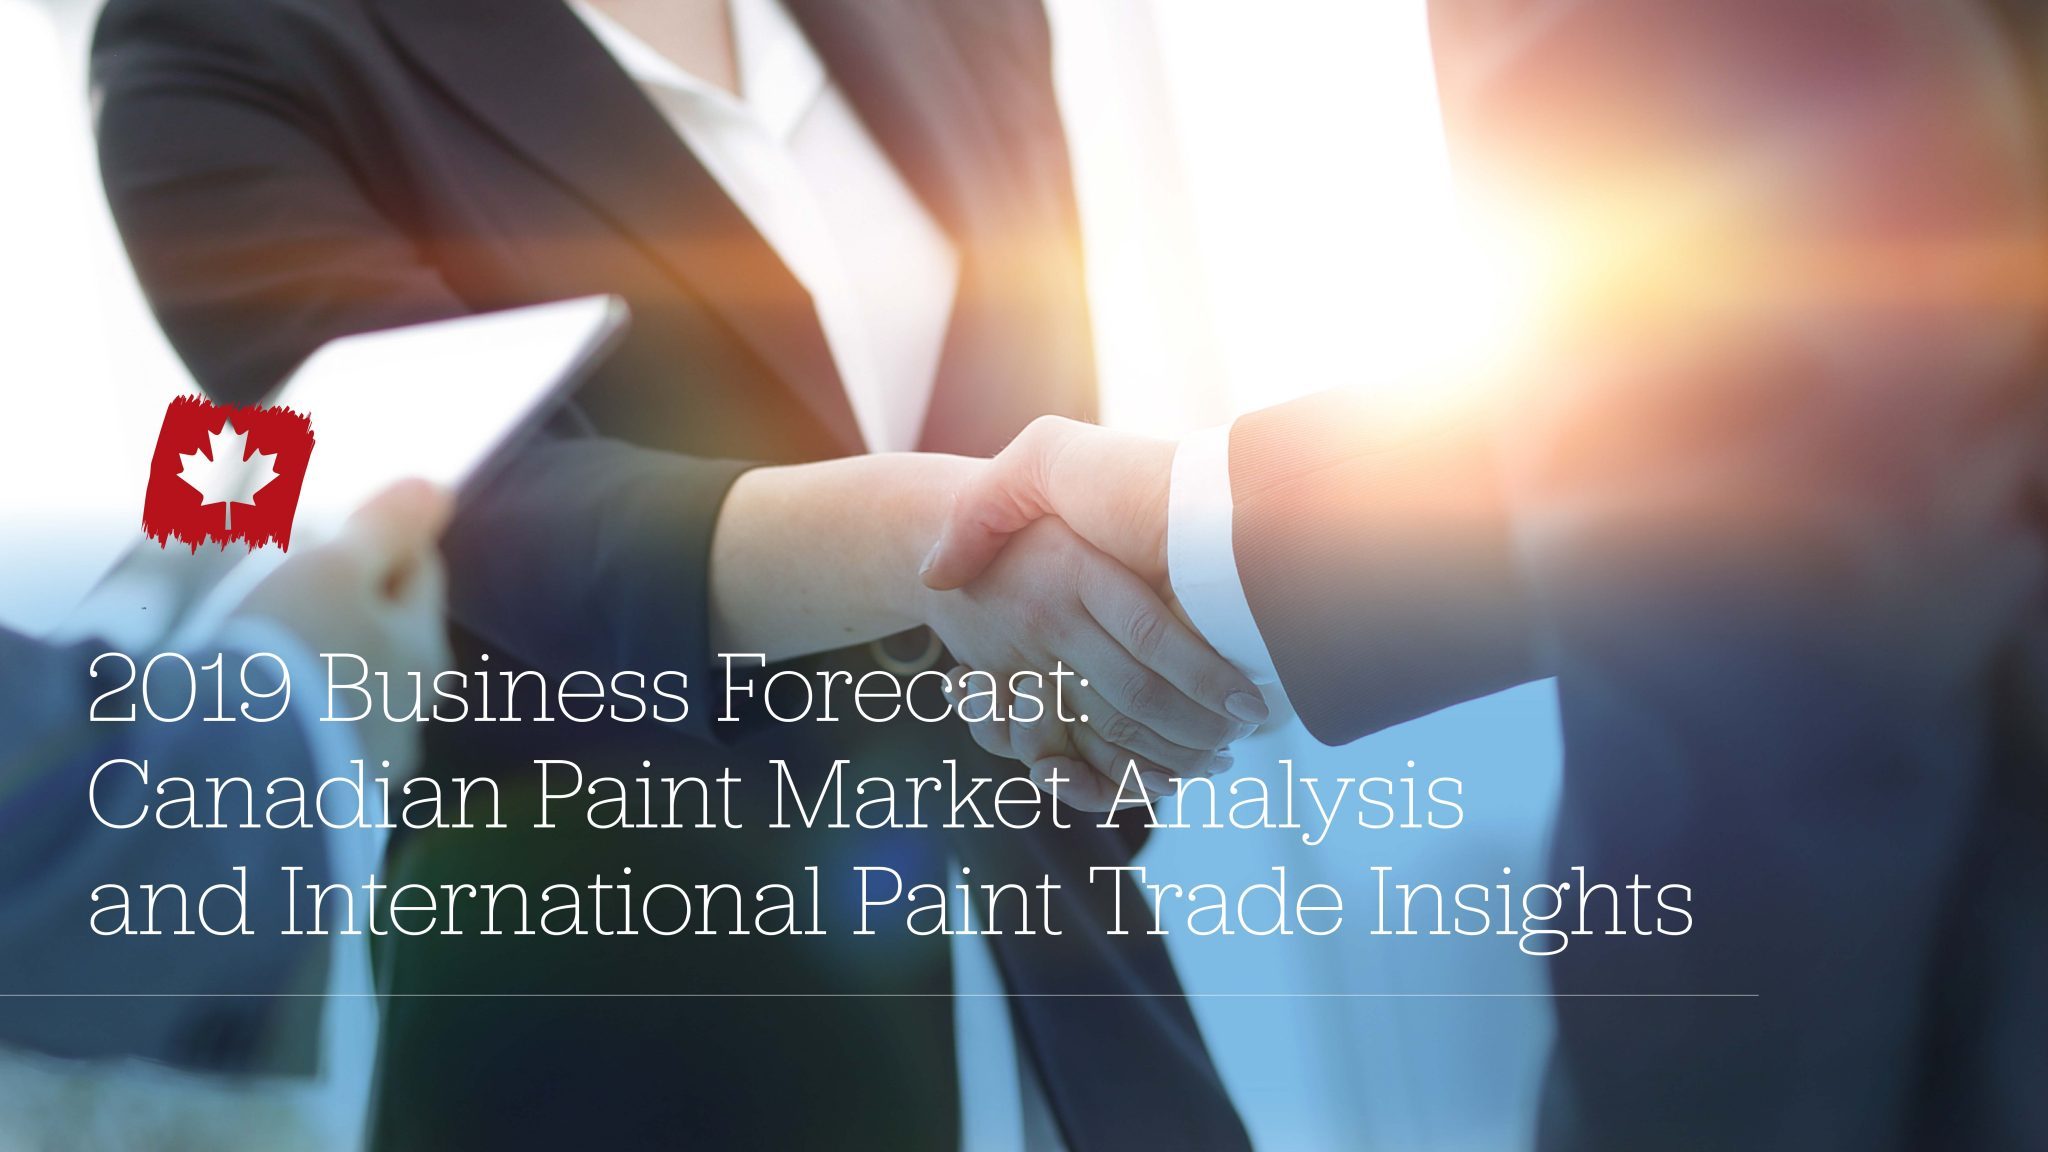 2019 Business Forecast: Canadian Paint Market Analysis and International Paint Trade Insights